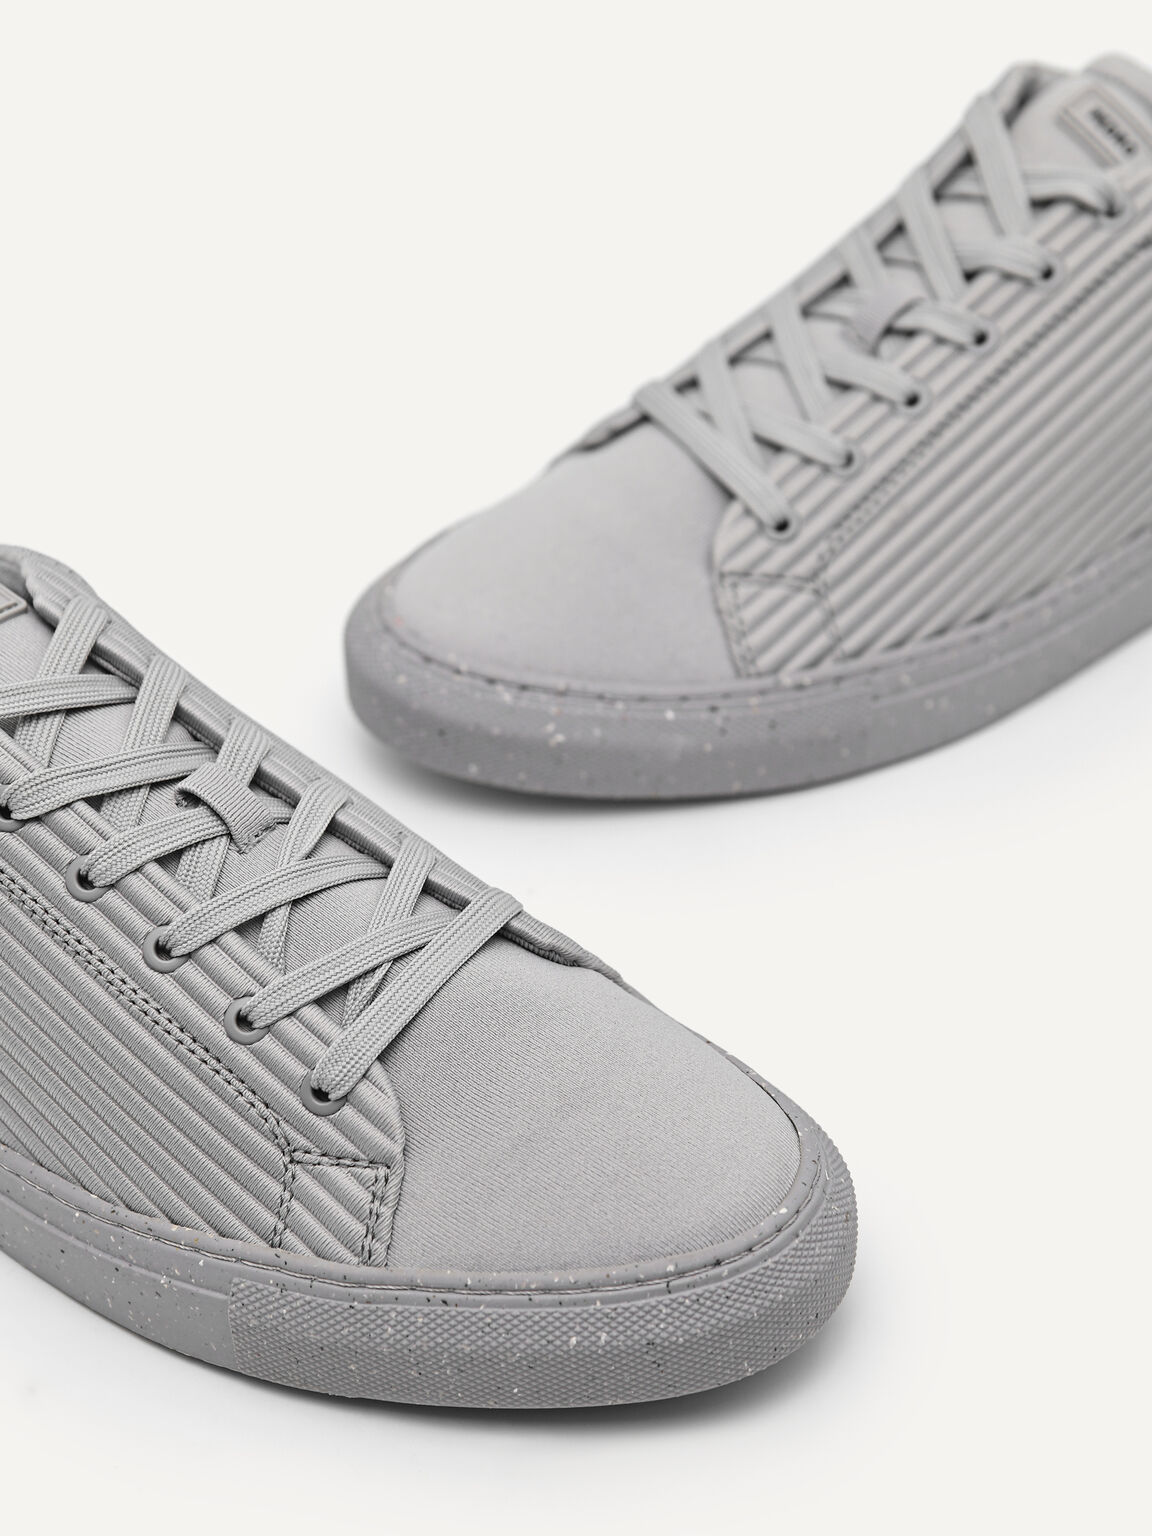 rePEDRO Pleated Sneakers, Grey, hi-res